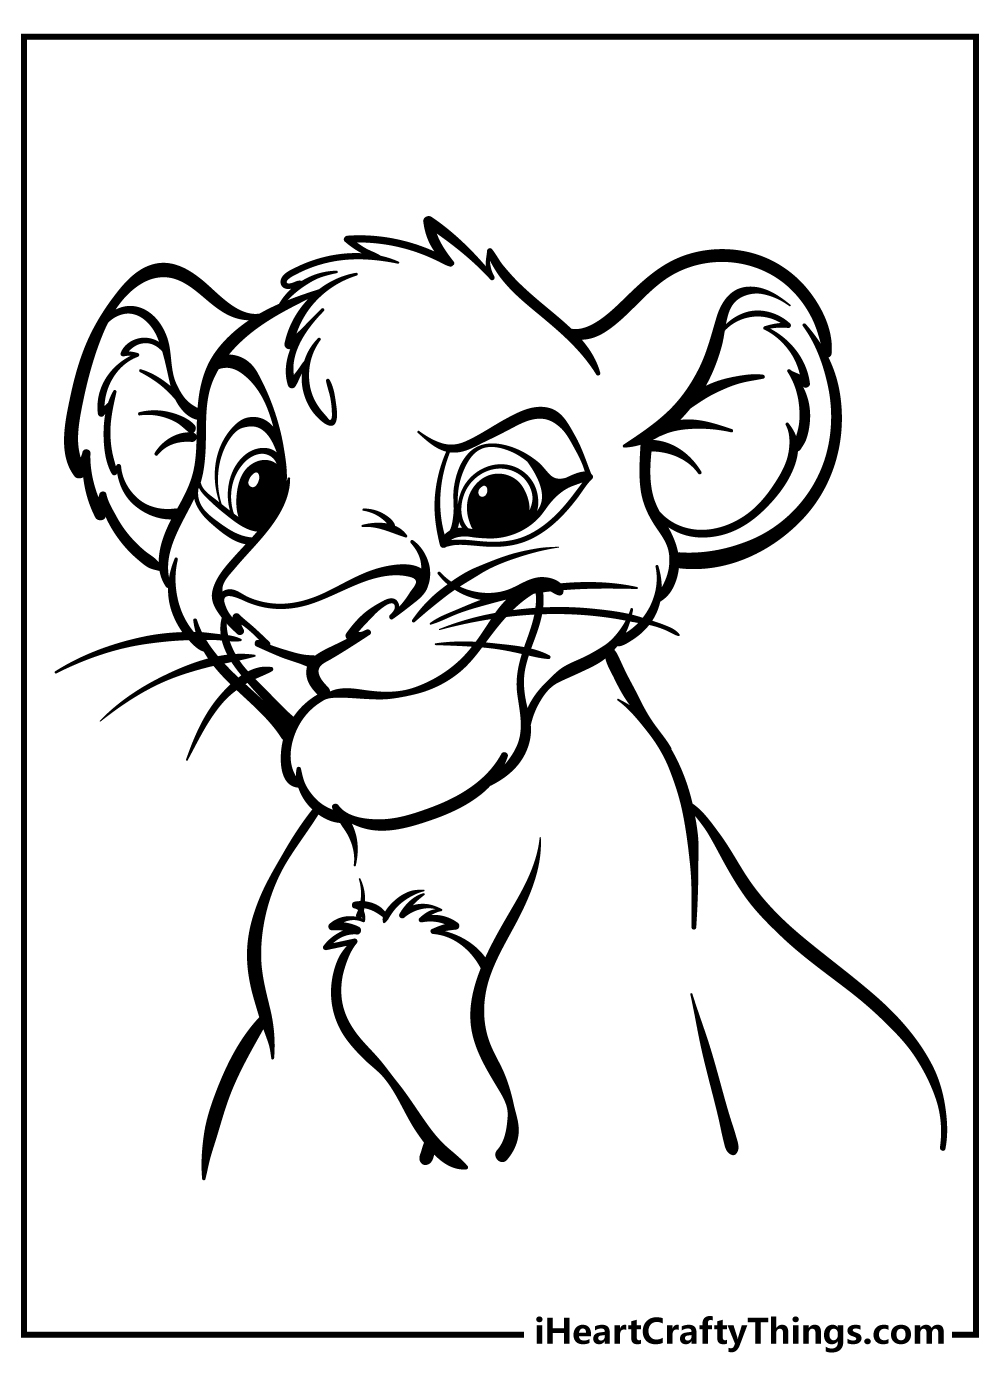 Lion King Coloring Sheet for children free download